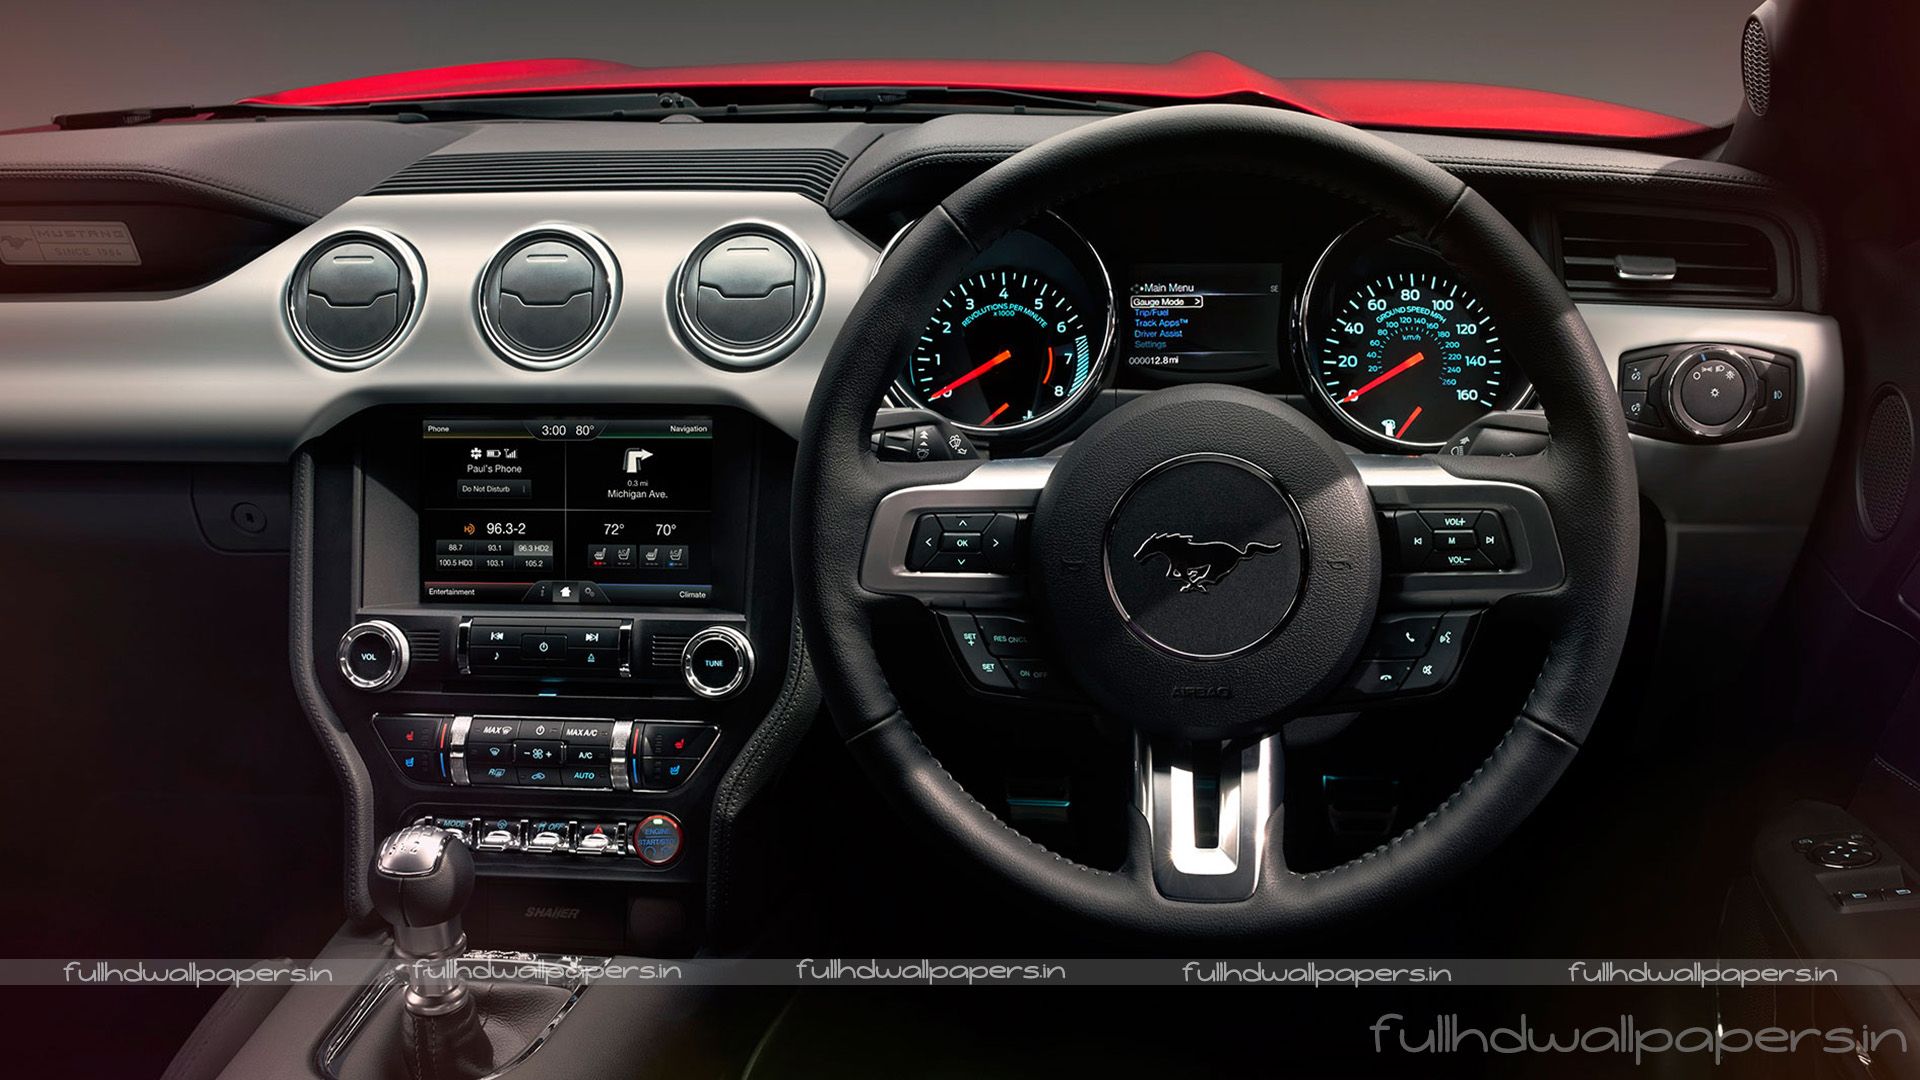 Amazing 49 Wallpapers Of Ford Mustang Car Dashboard, - Ford Mustang Gt Dashboard , HD Wallpaper & Backgrounds